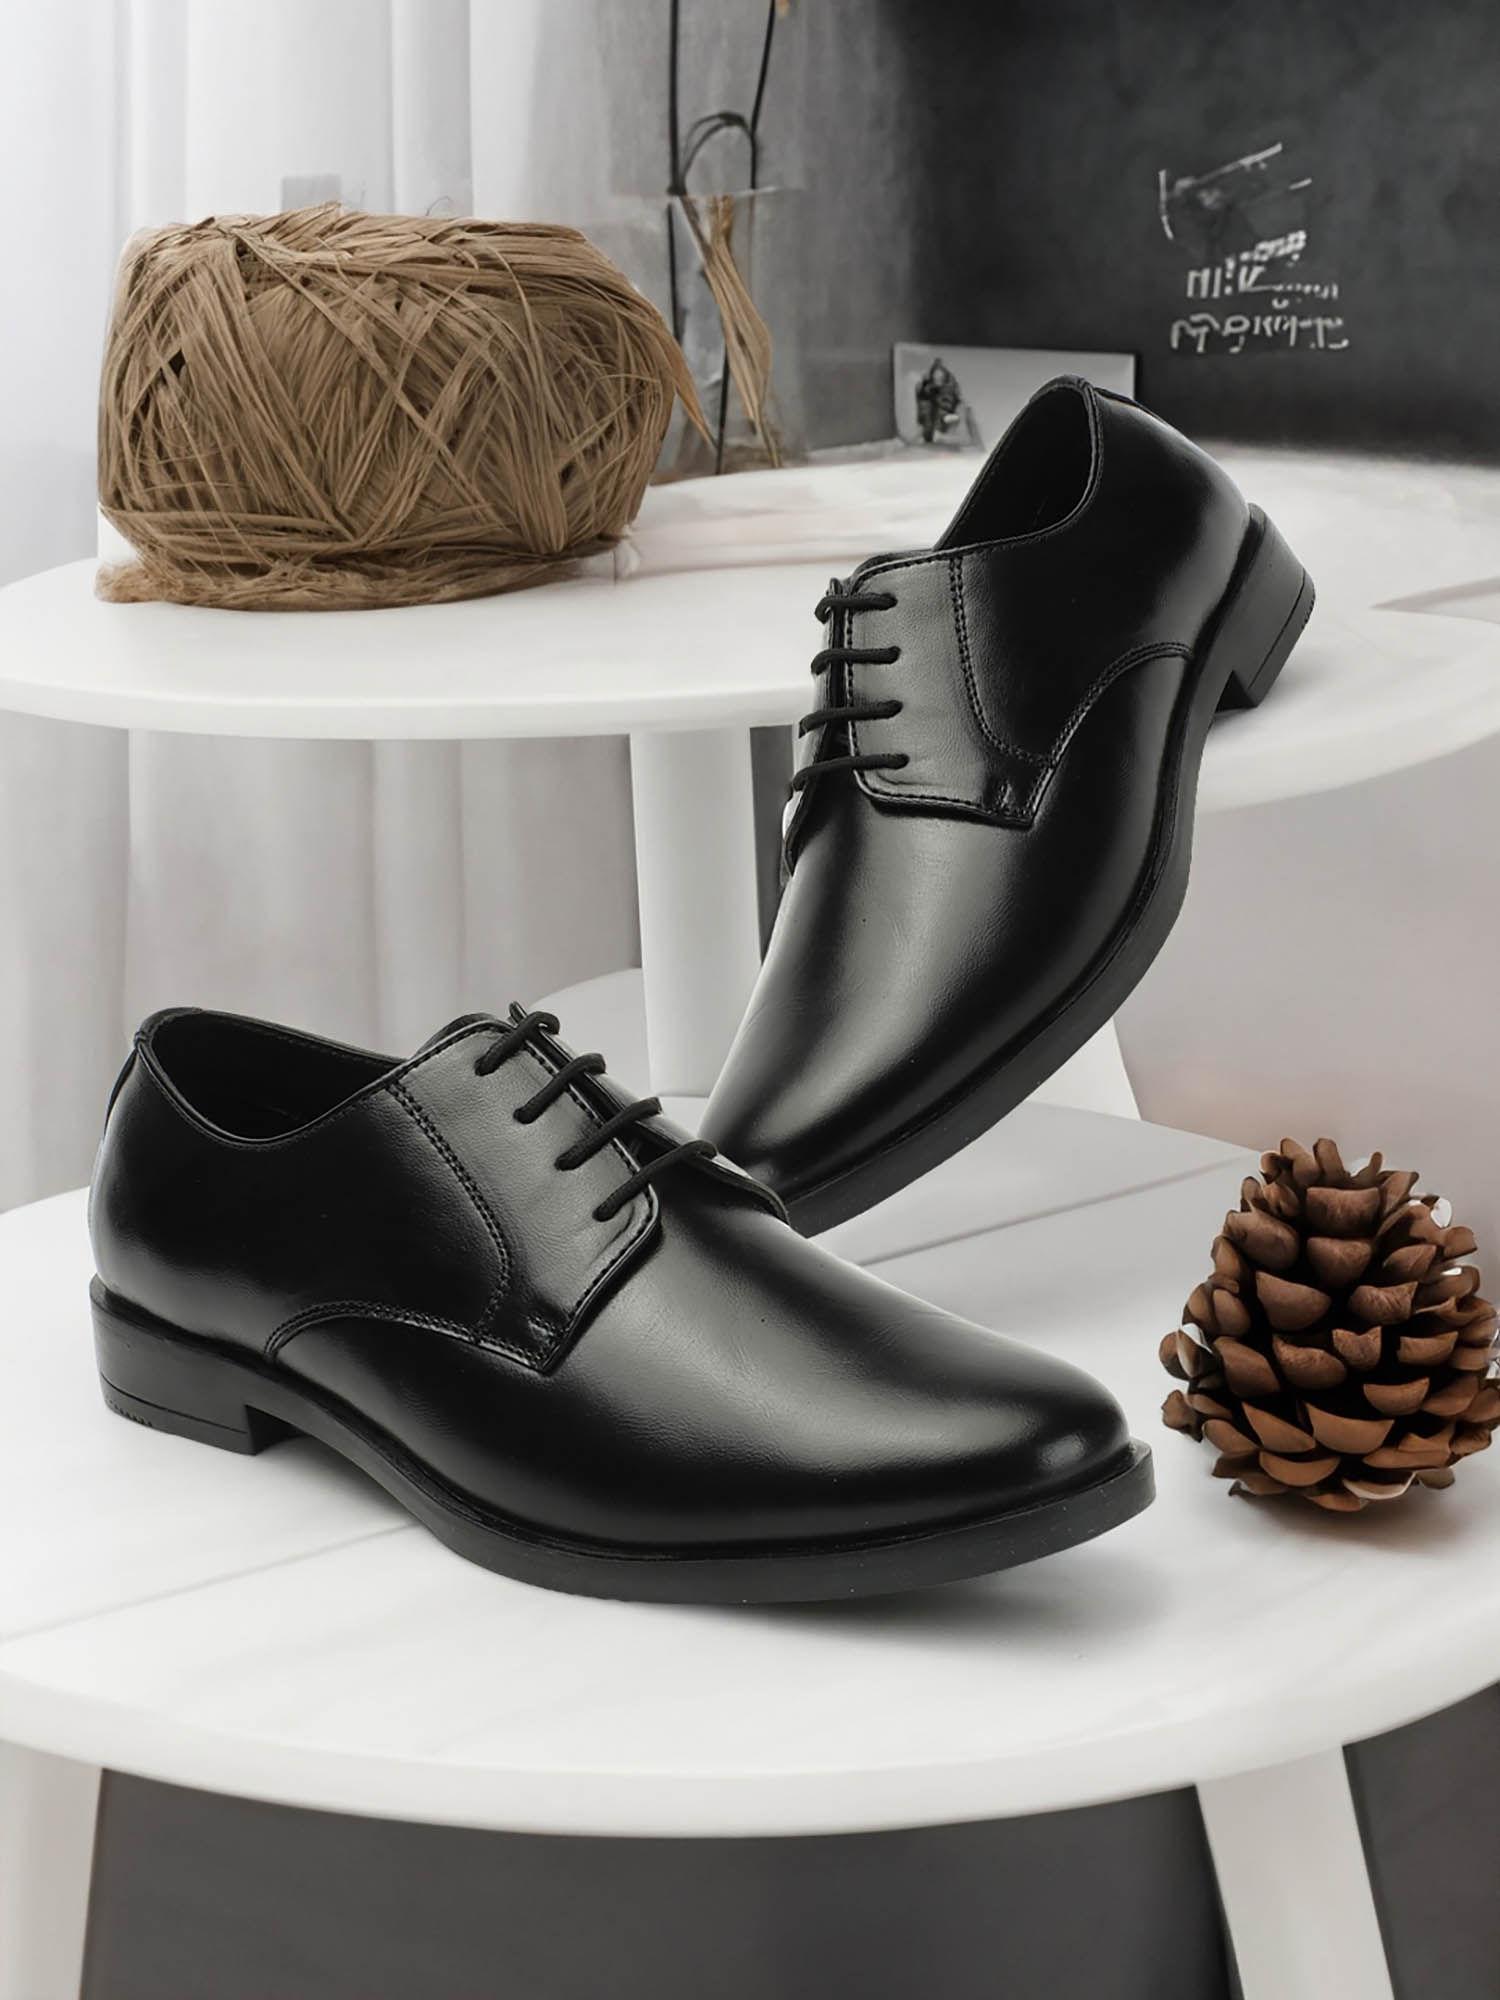 mens stylish black color formal lace-ups leather oxfords